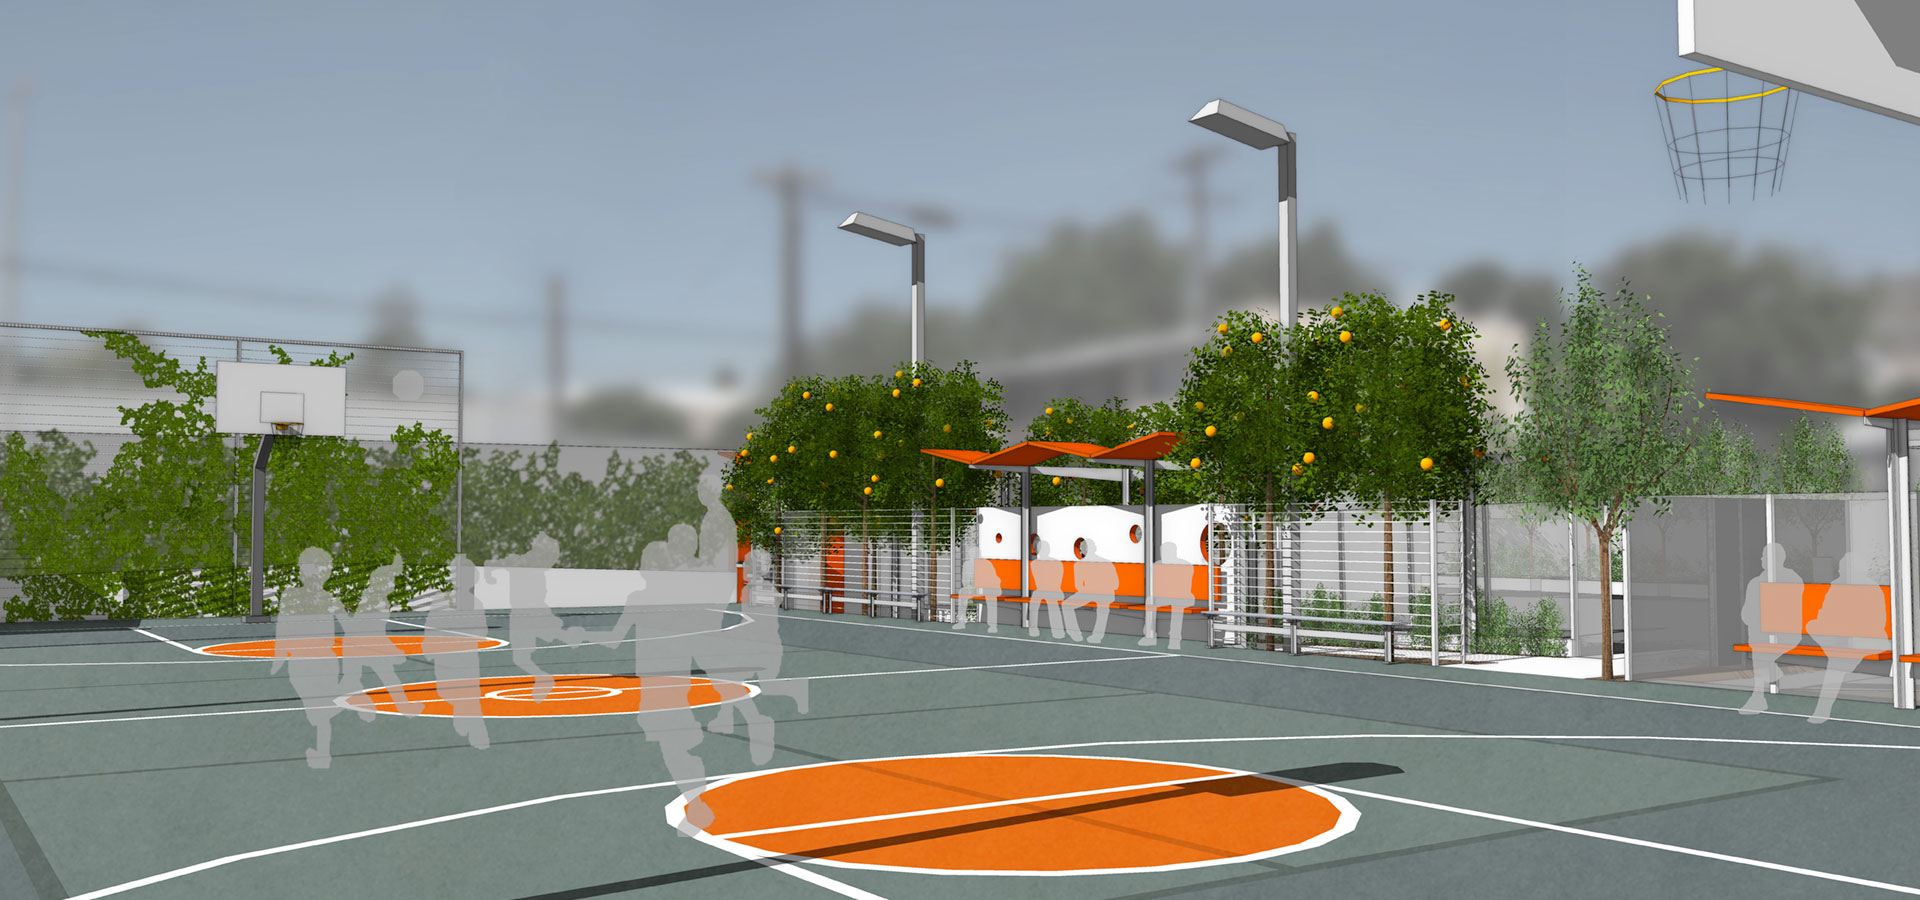 A rendering of the sports court